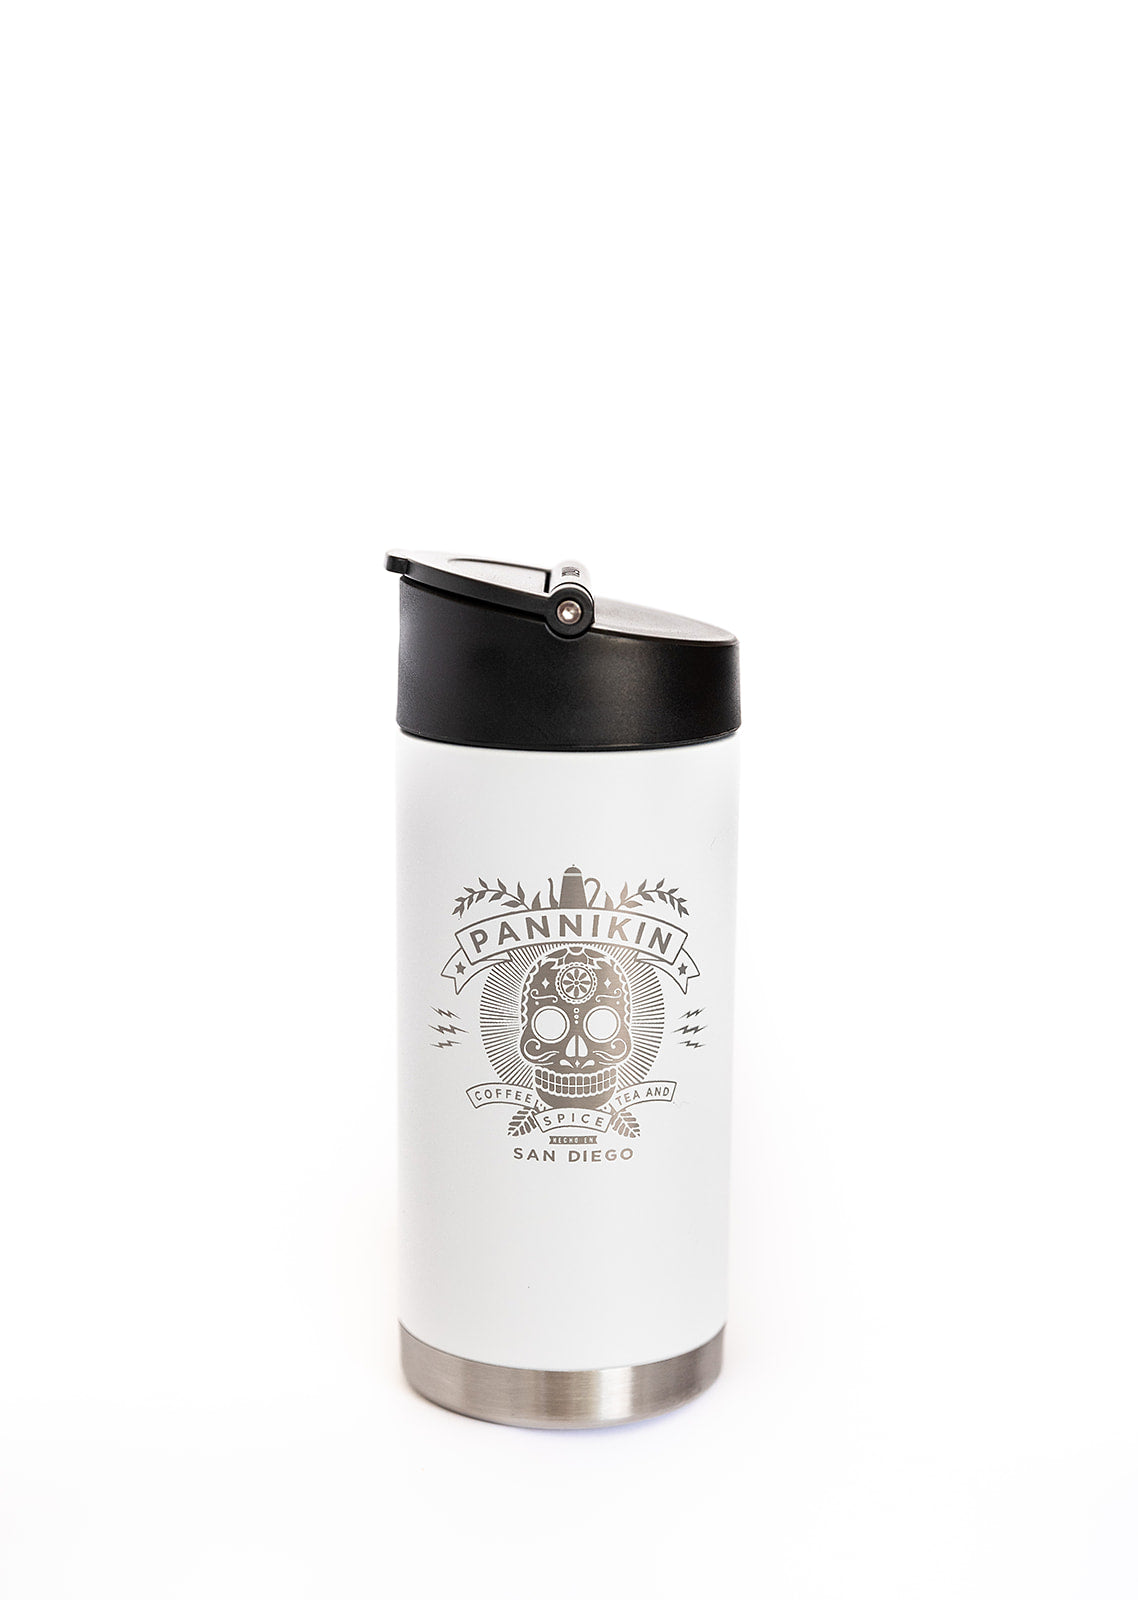 Coffee Stainless Steel Double Wall Insulated Thermal Mug 15 oz